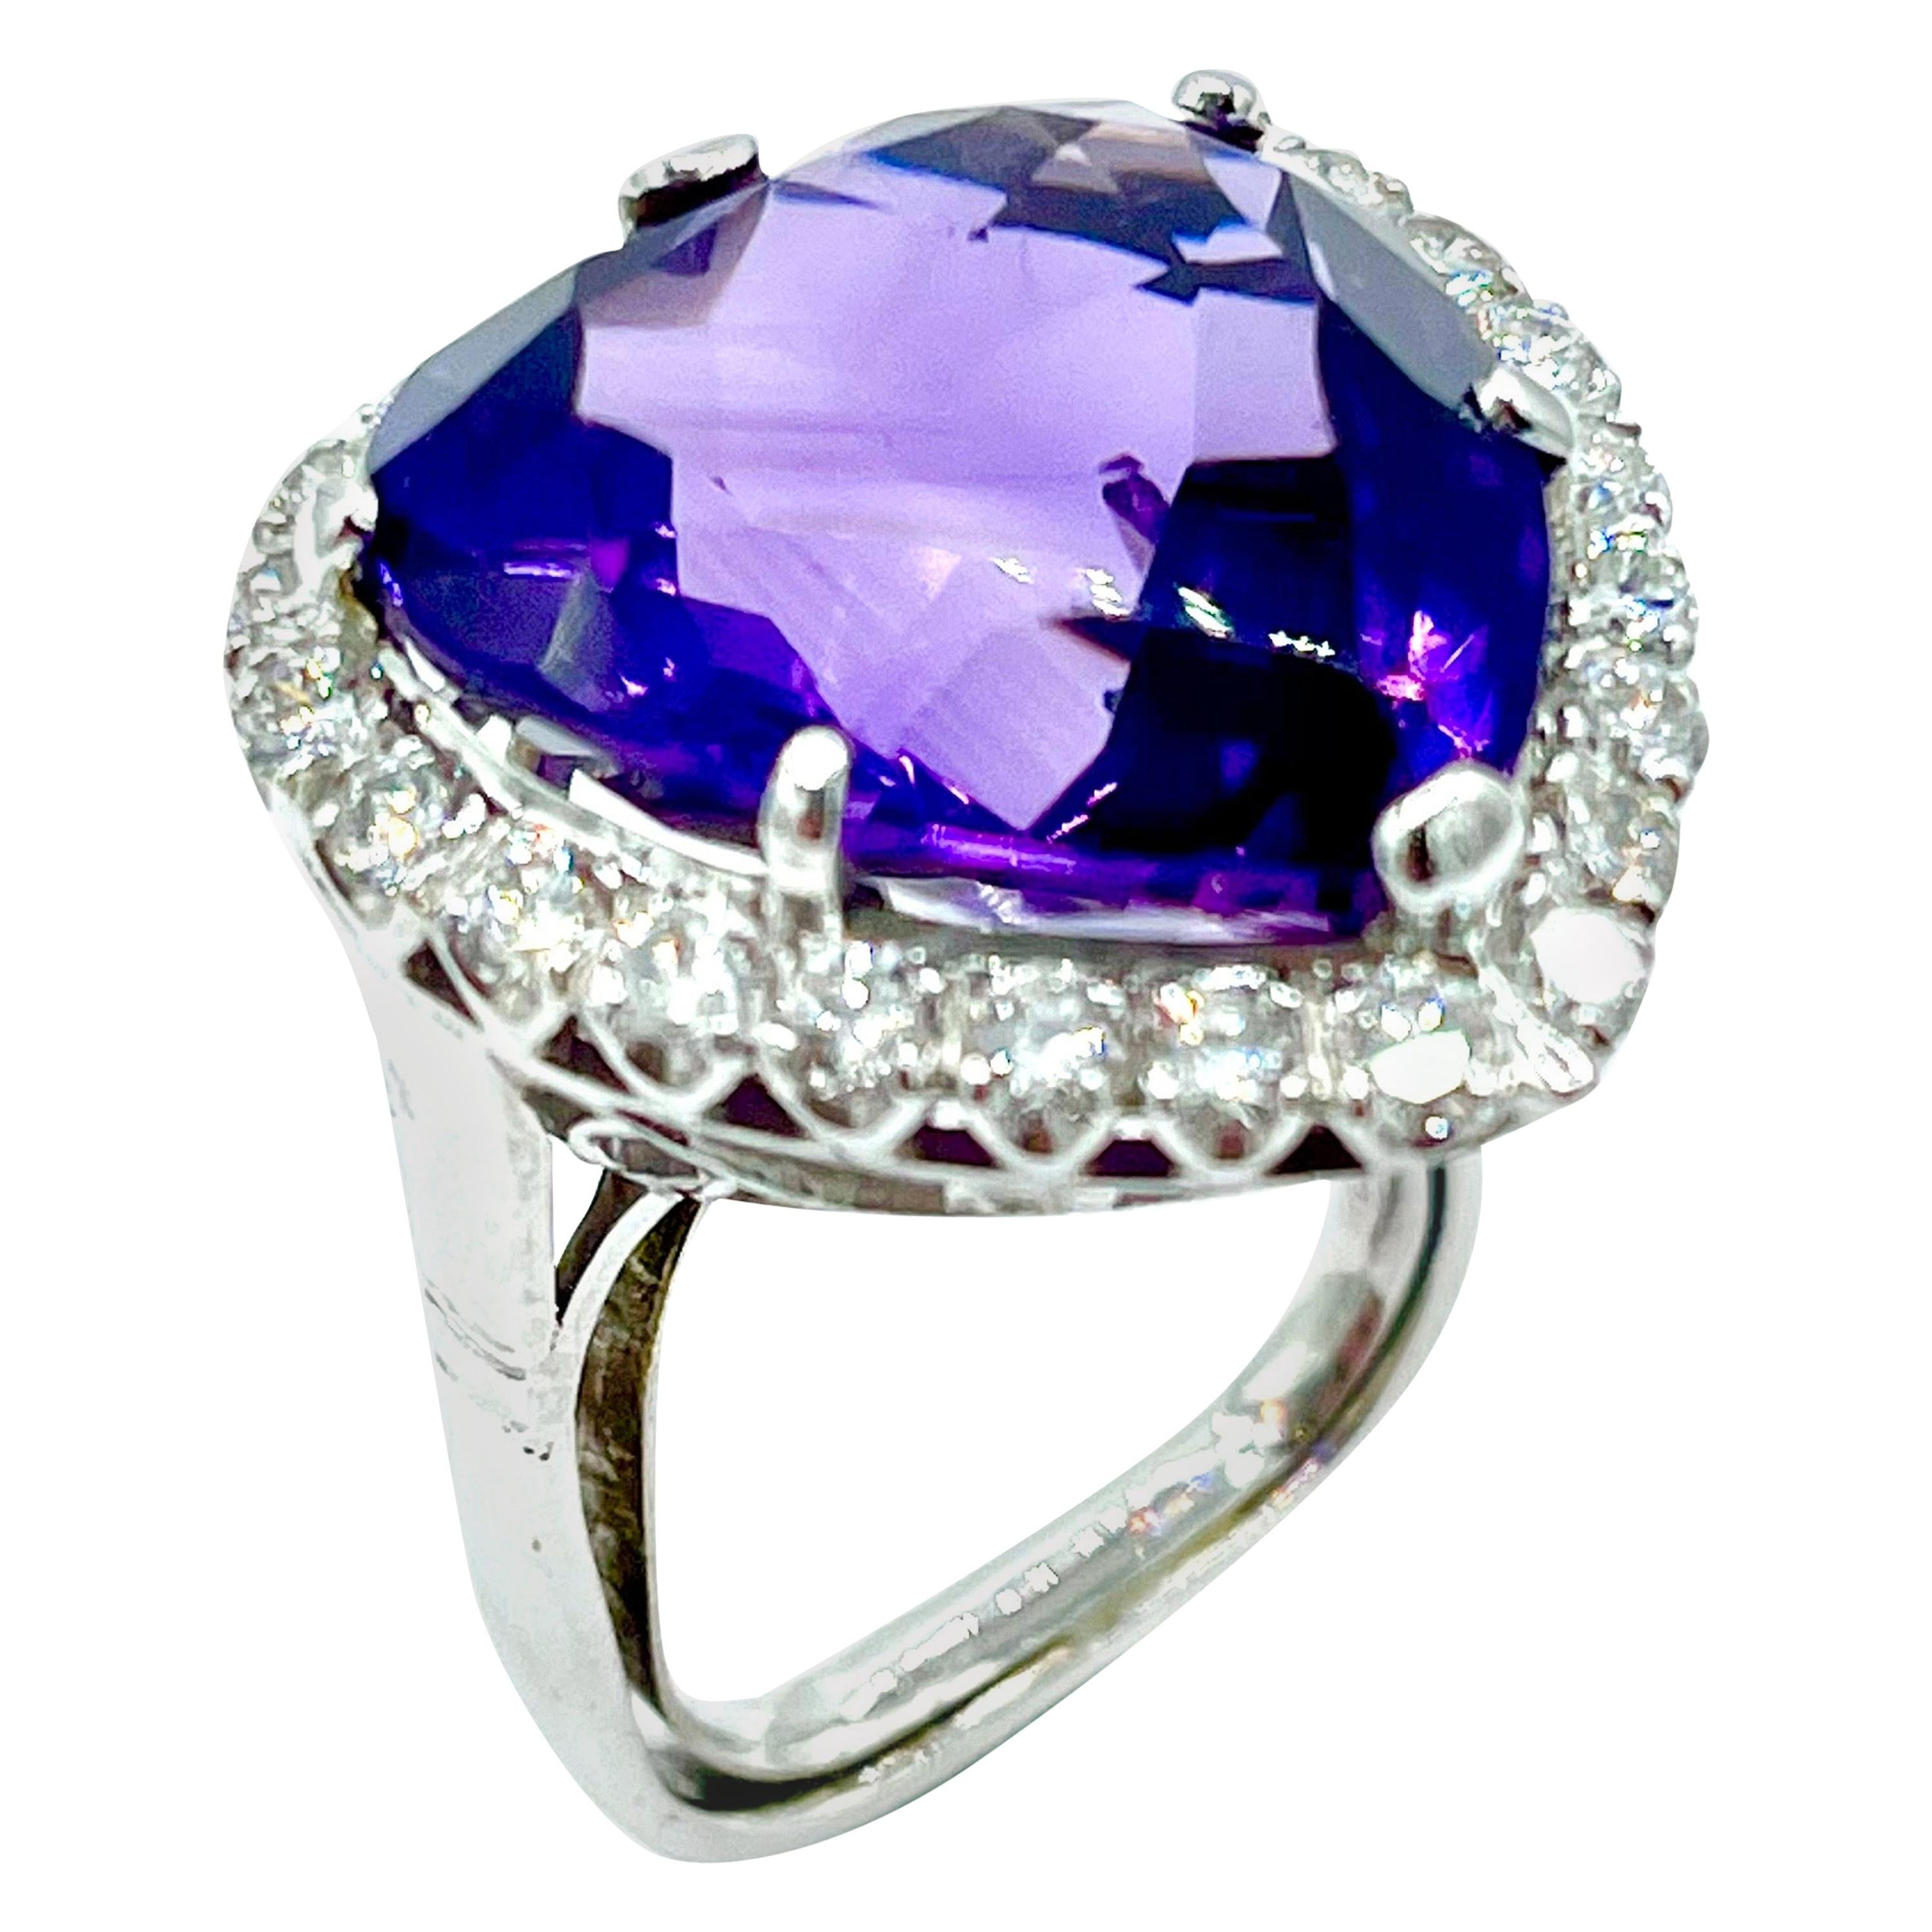 12.88 Carat Heart Shape Amethyst and Diamond Ring For Sale